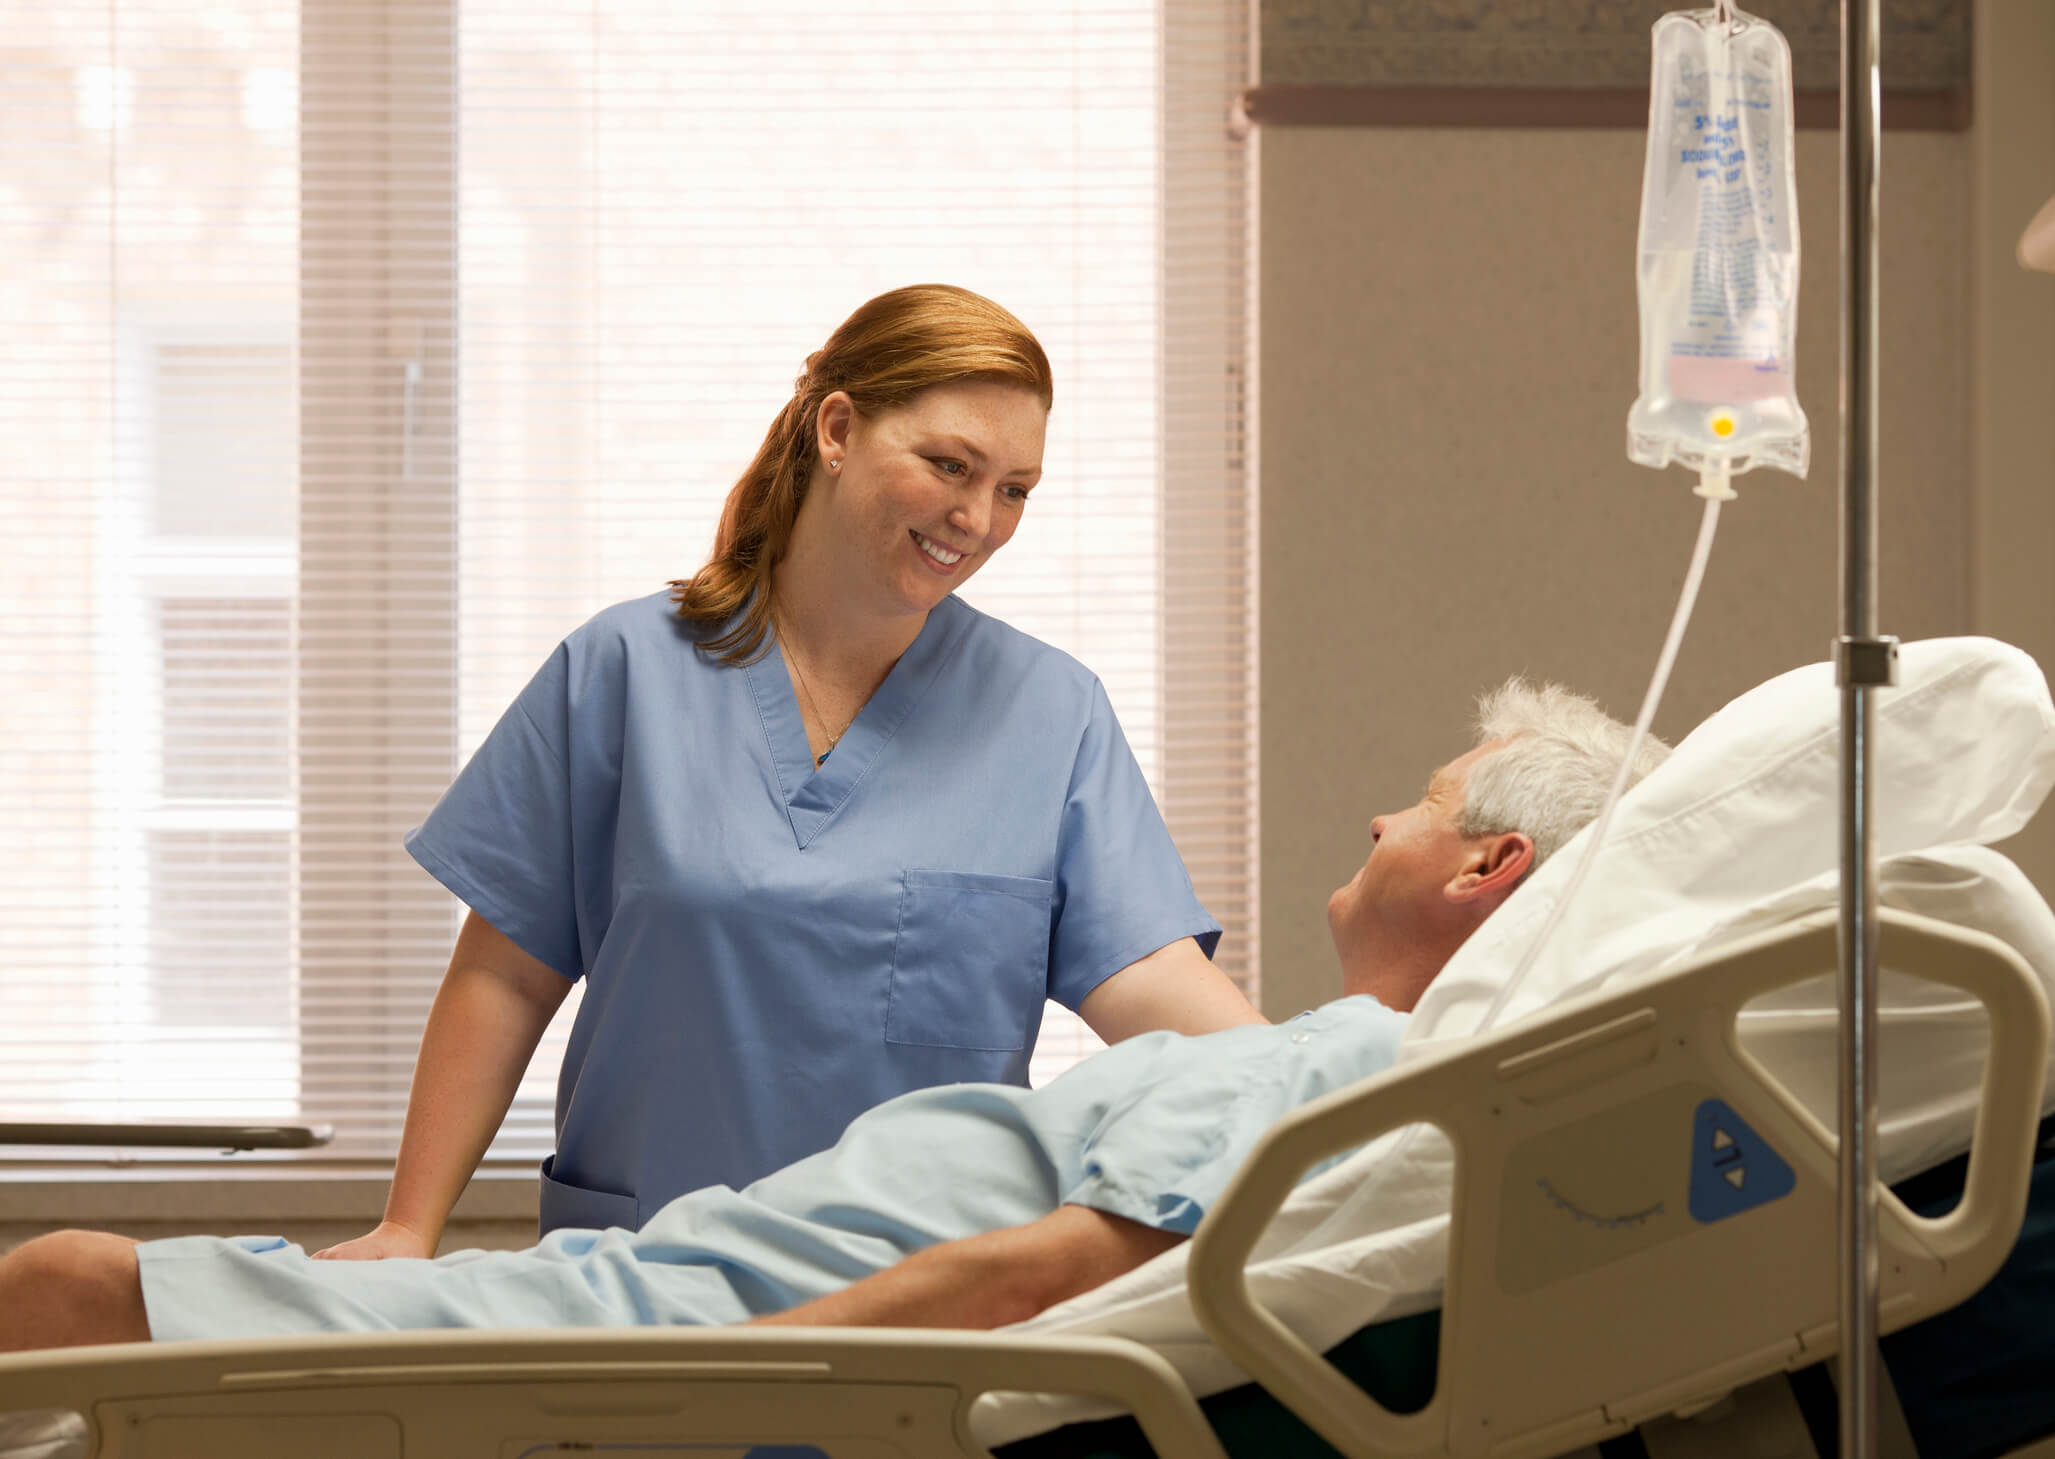 Smiling mid-adult female nurse checking in on an elderly male patient by his bedside in a hospital room